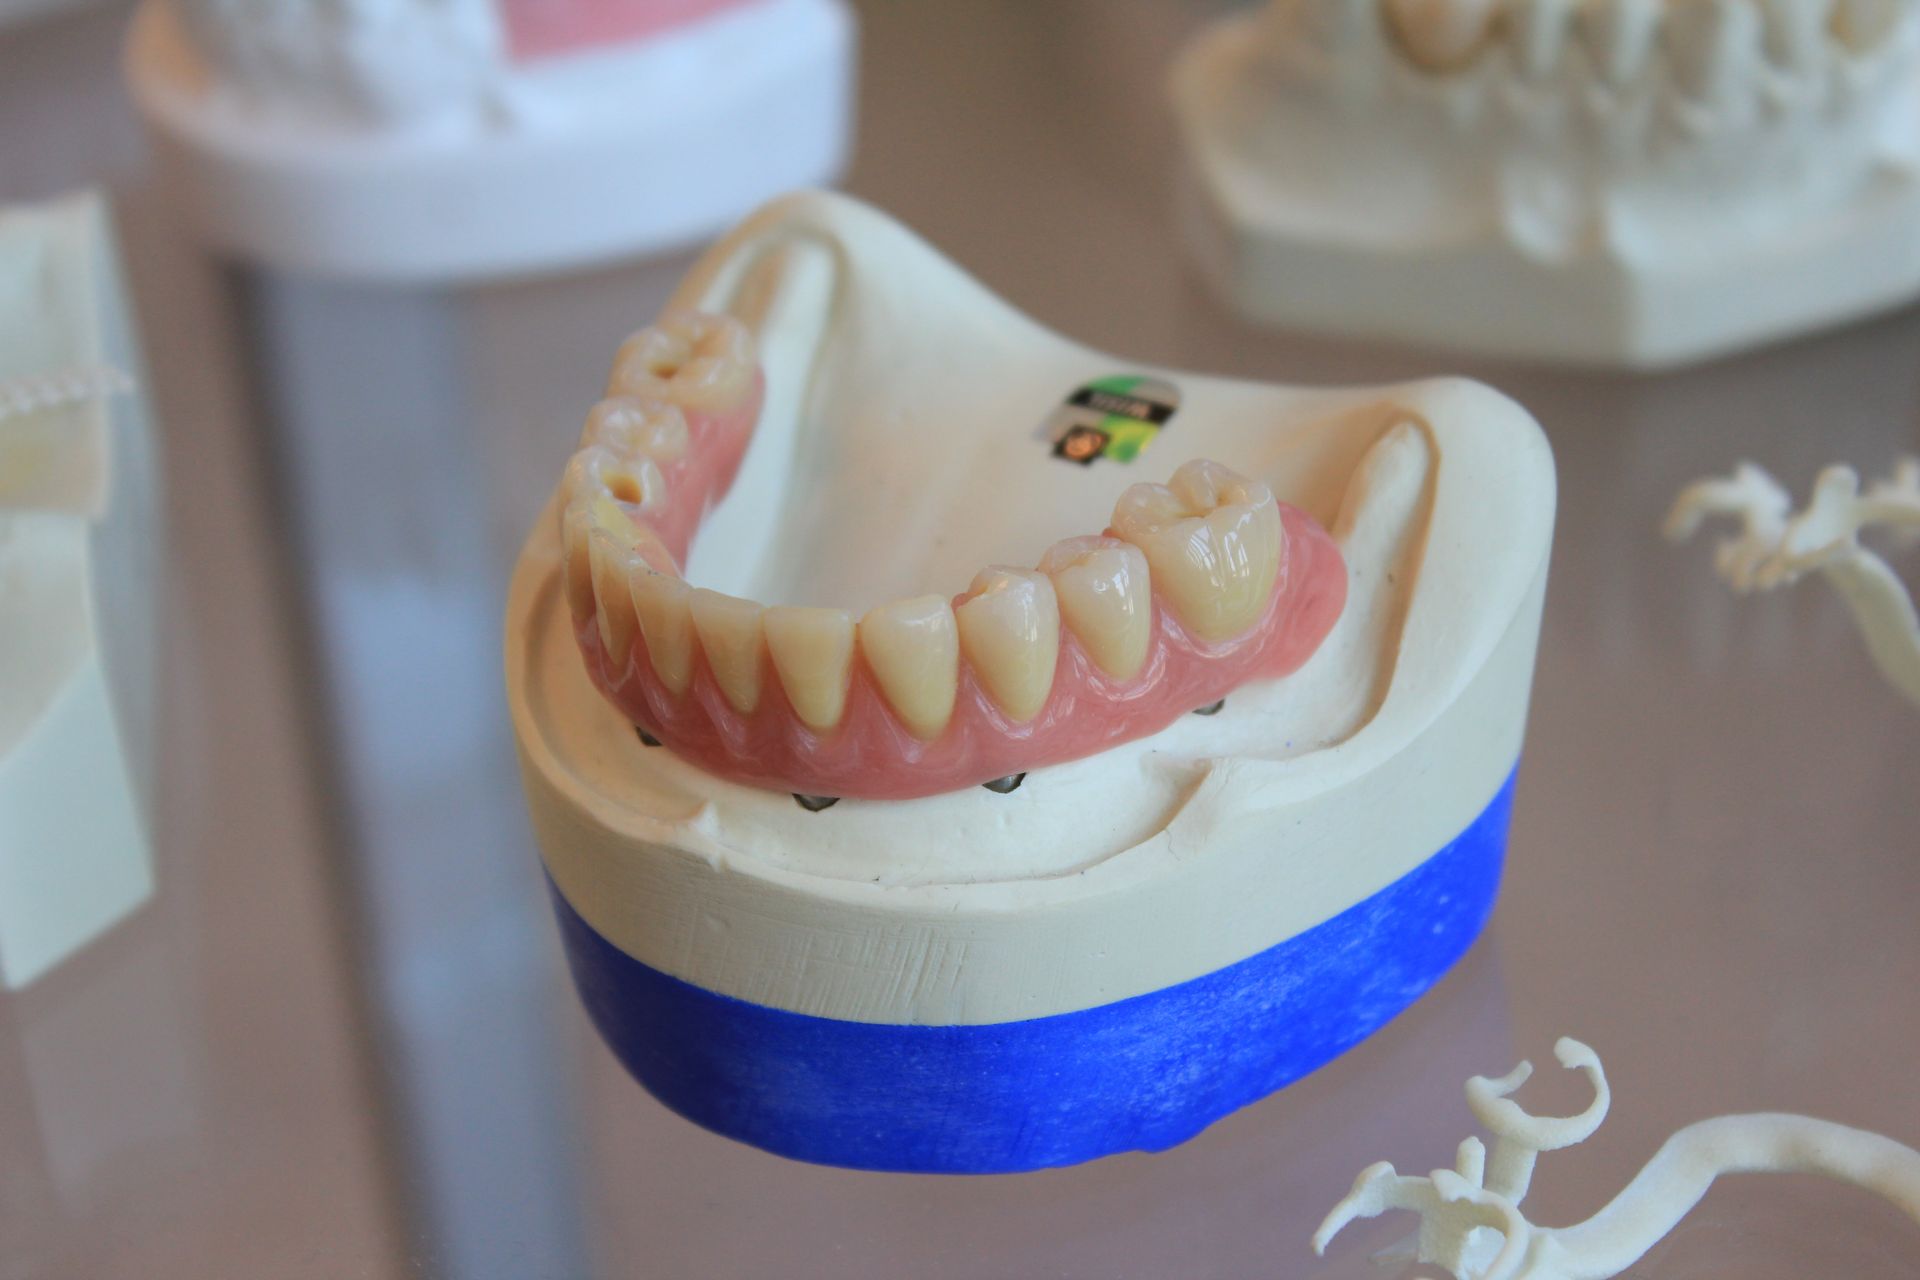 What Does a Tooth Implant Look Like?